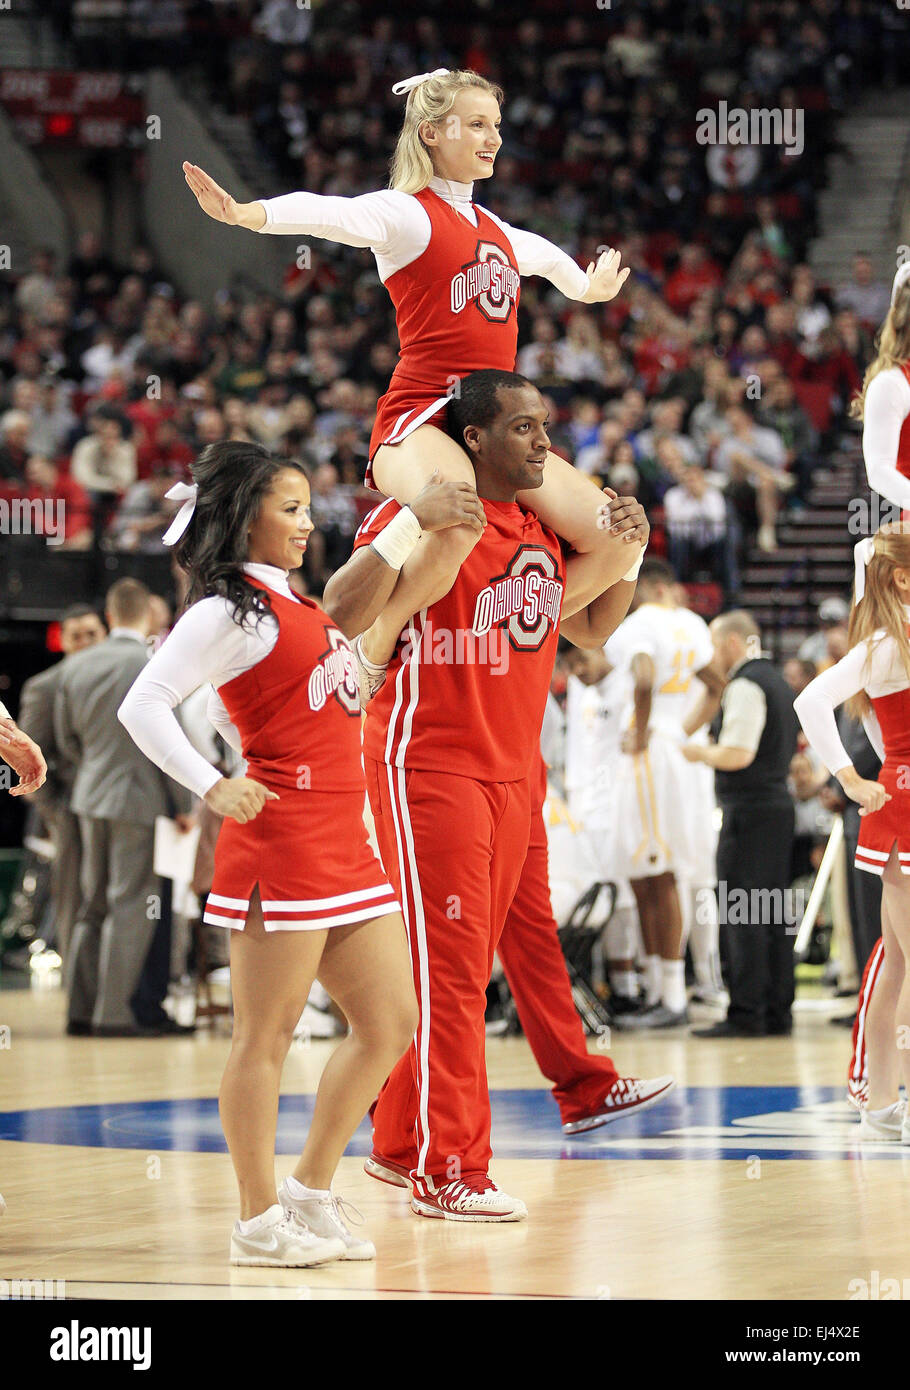 March 19, 2015: The Ohio State cheerleading squad perform during a timeout  at the 2nd round of the 2015 NCAA Men's Basketball Championships between  the Buckeyes and the Virginia Commonwealth University Rams